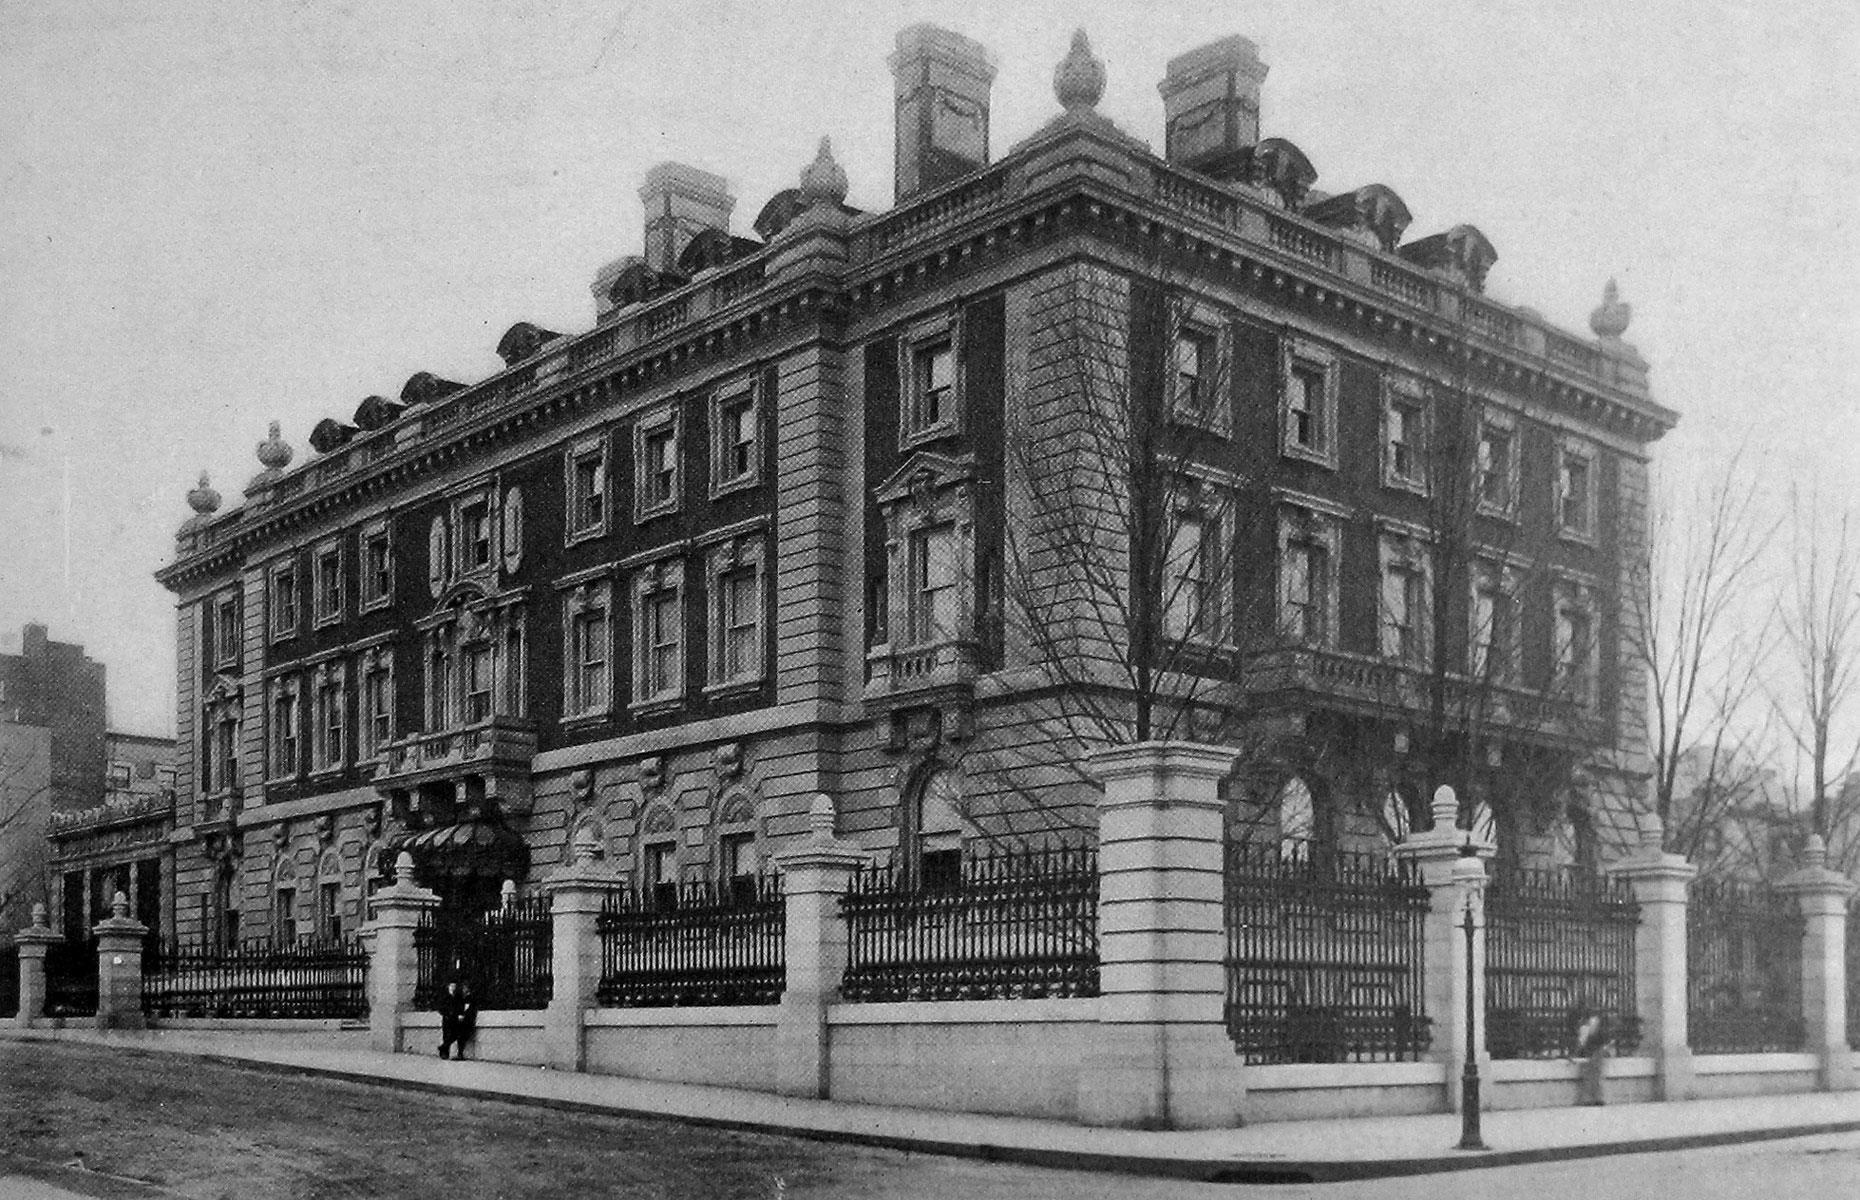 <p>Carnegie’s real estate holdings mirrored his preachings, and despite his immense wealth, he asked architectural firm Babb, Cook & Willard to design for him the “most modest, plainest and most roomy house in New York.”</p>  <p>The home would be located not on the fashionable stretch of Fifth Avenue, where so many of his peers had built their palaces, but on a 1.3-acre lot about a mile north of the desirable area.</p>